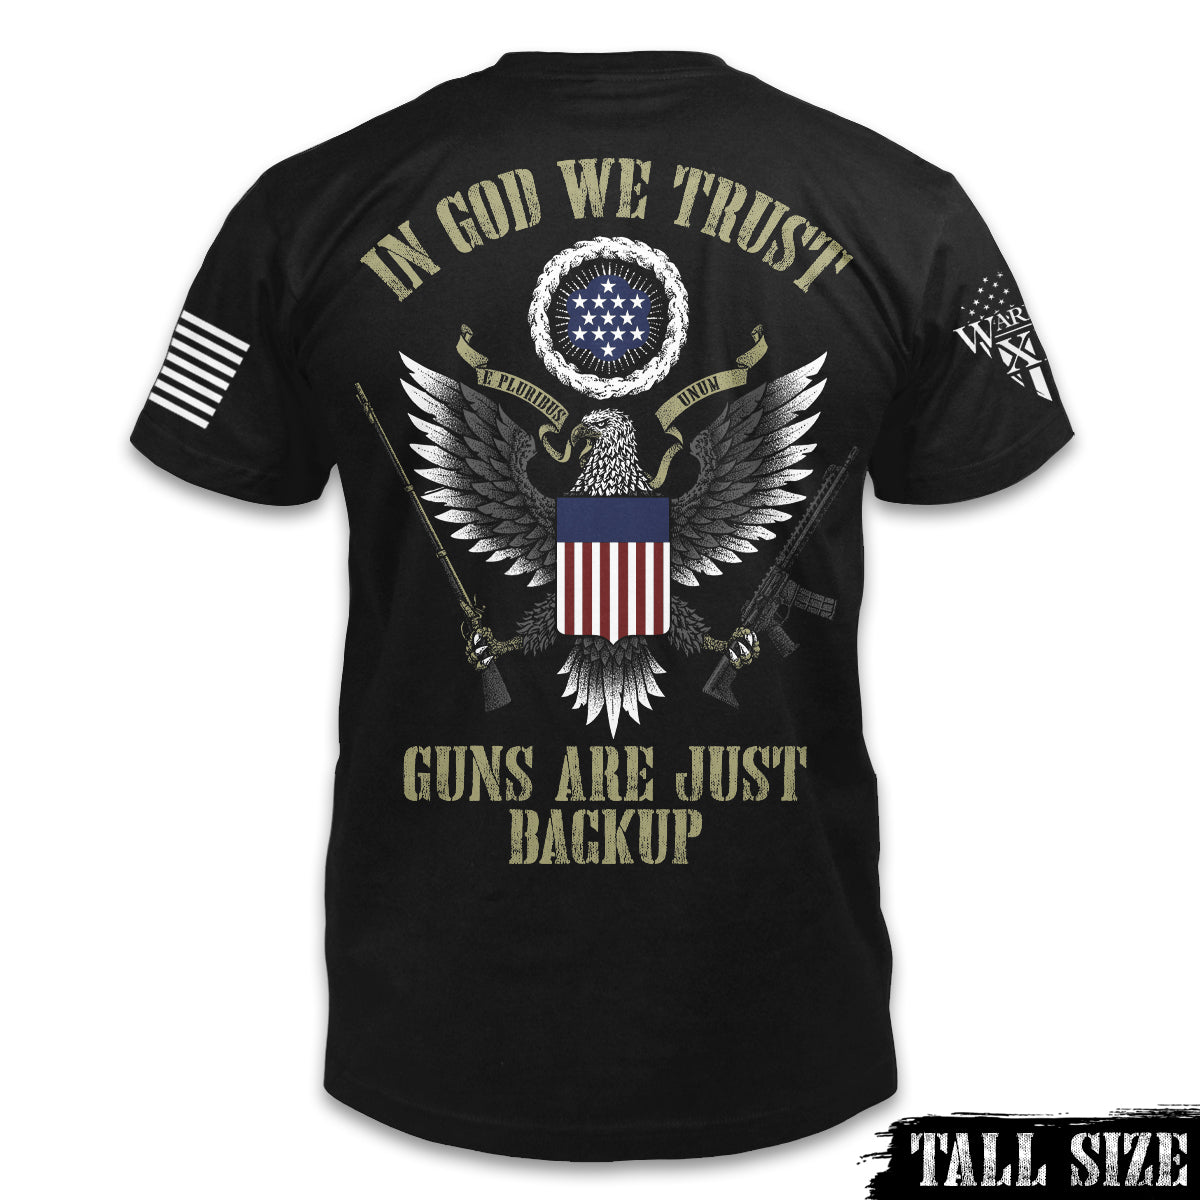 A black tall size shirt with the words "In God we trust, guns are just backup" with an american eagle and the USA flag printed on the back of the shirt.